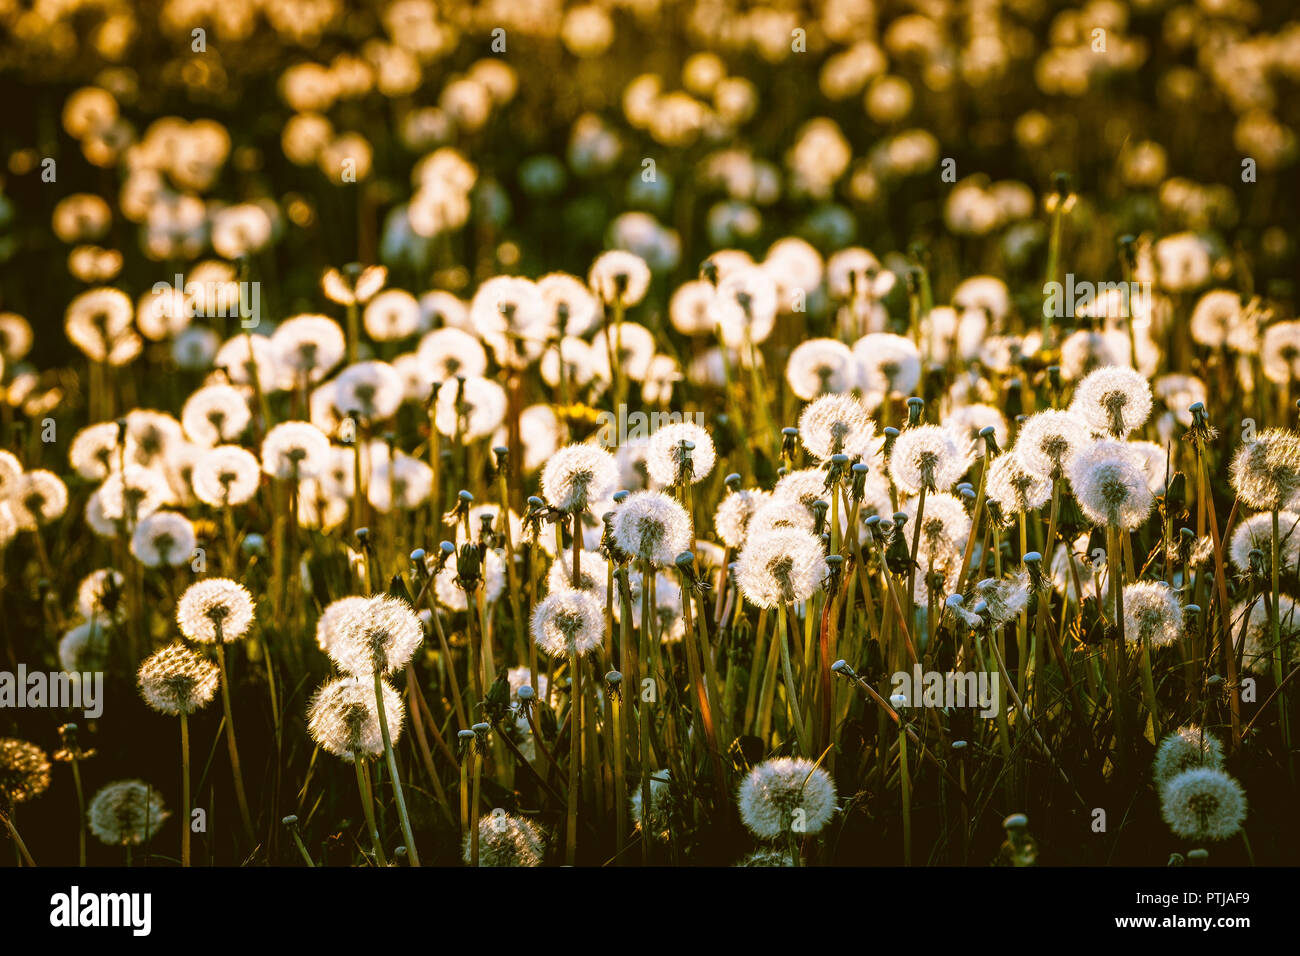 Dandelion seed heads glow with the lights as the sun sets in the evening. Stock Photo